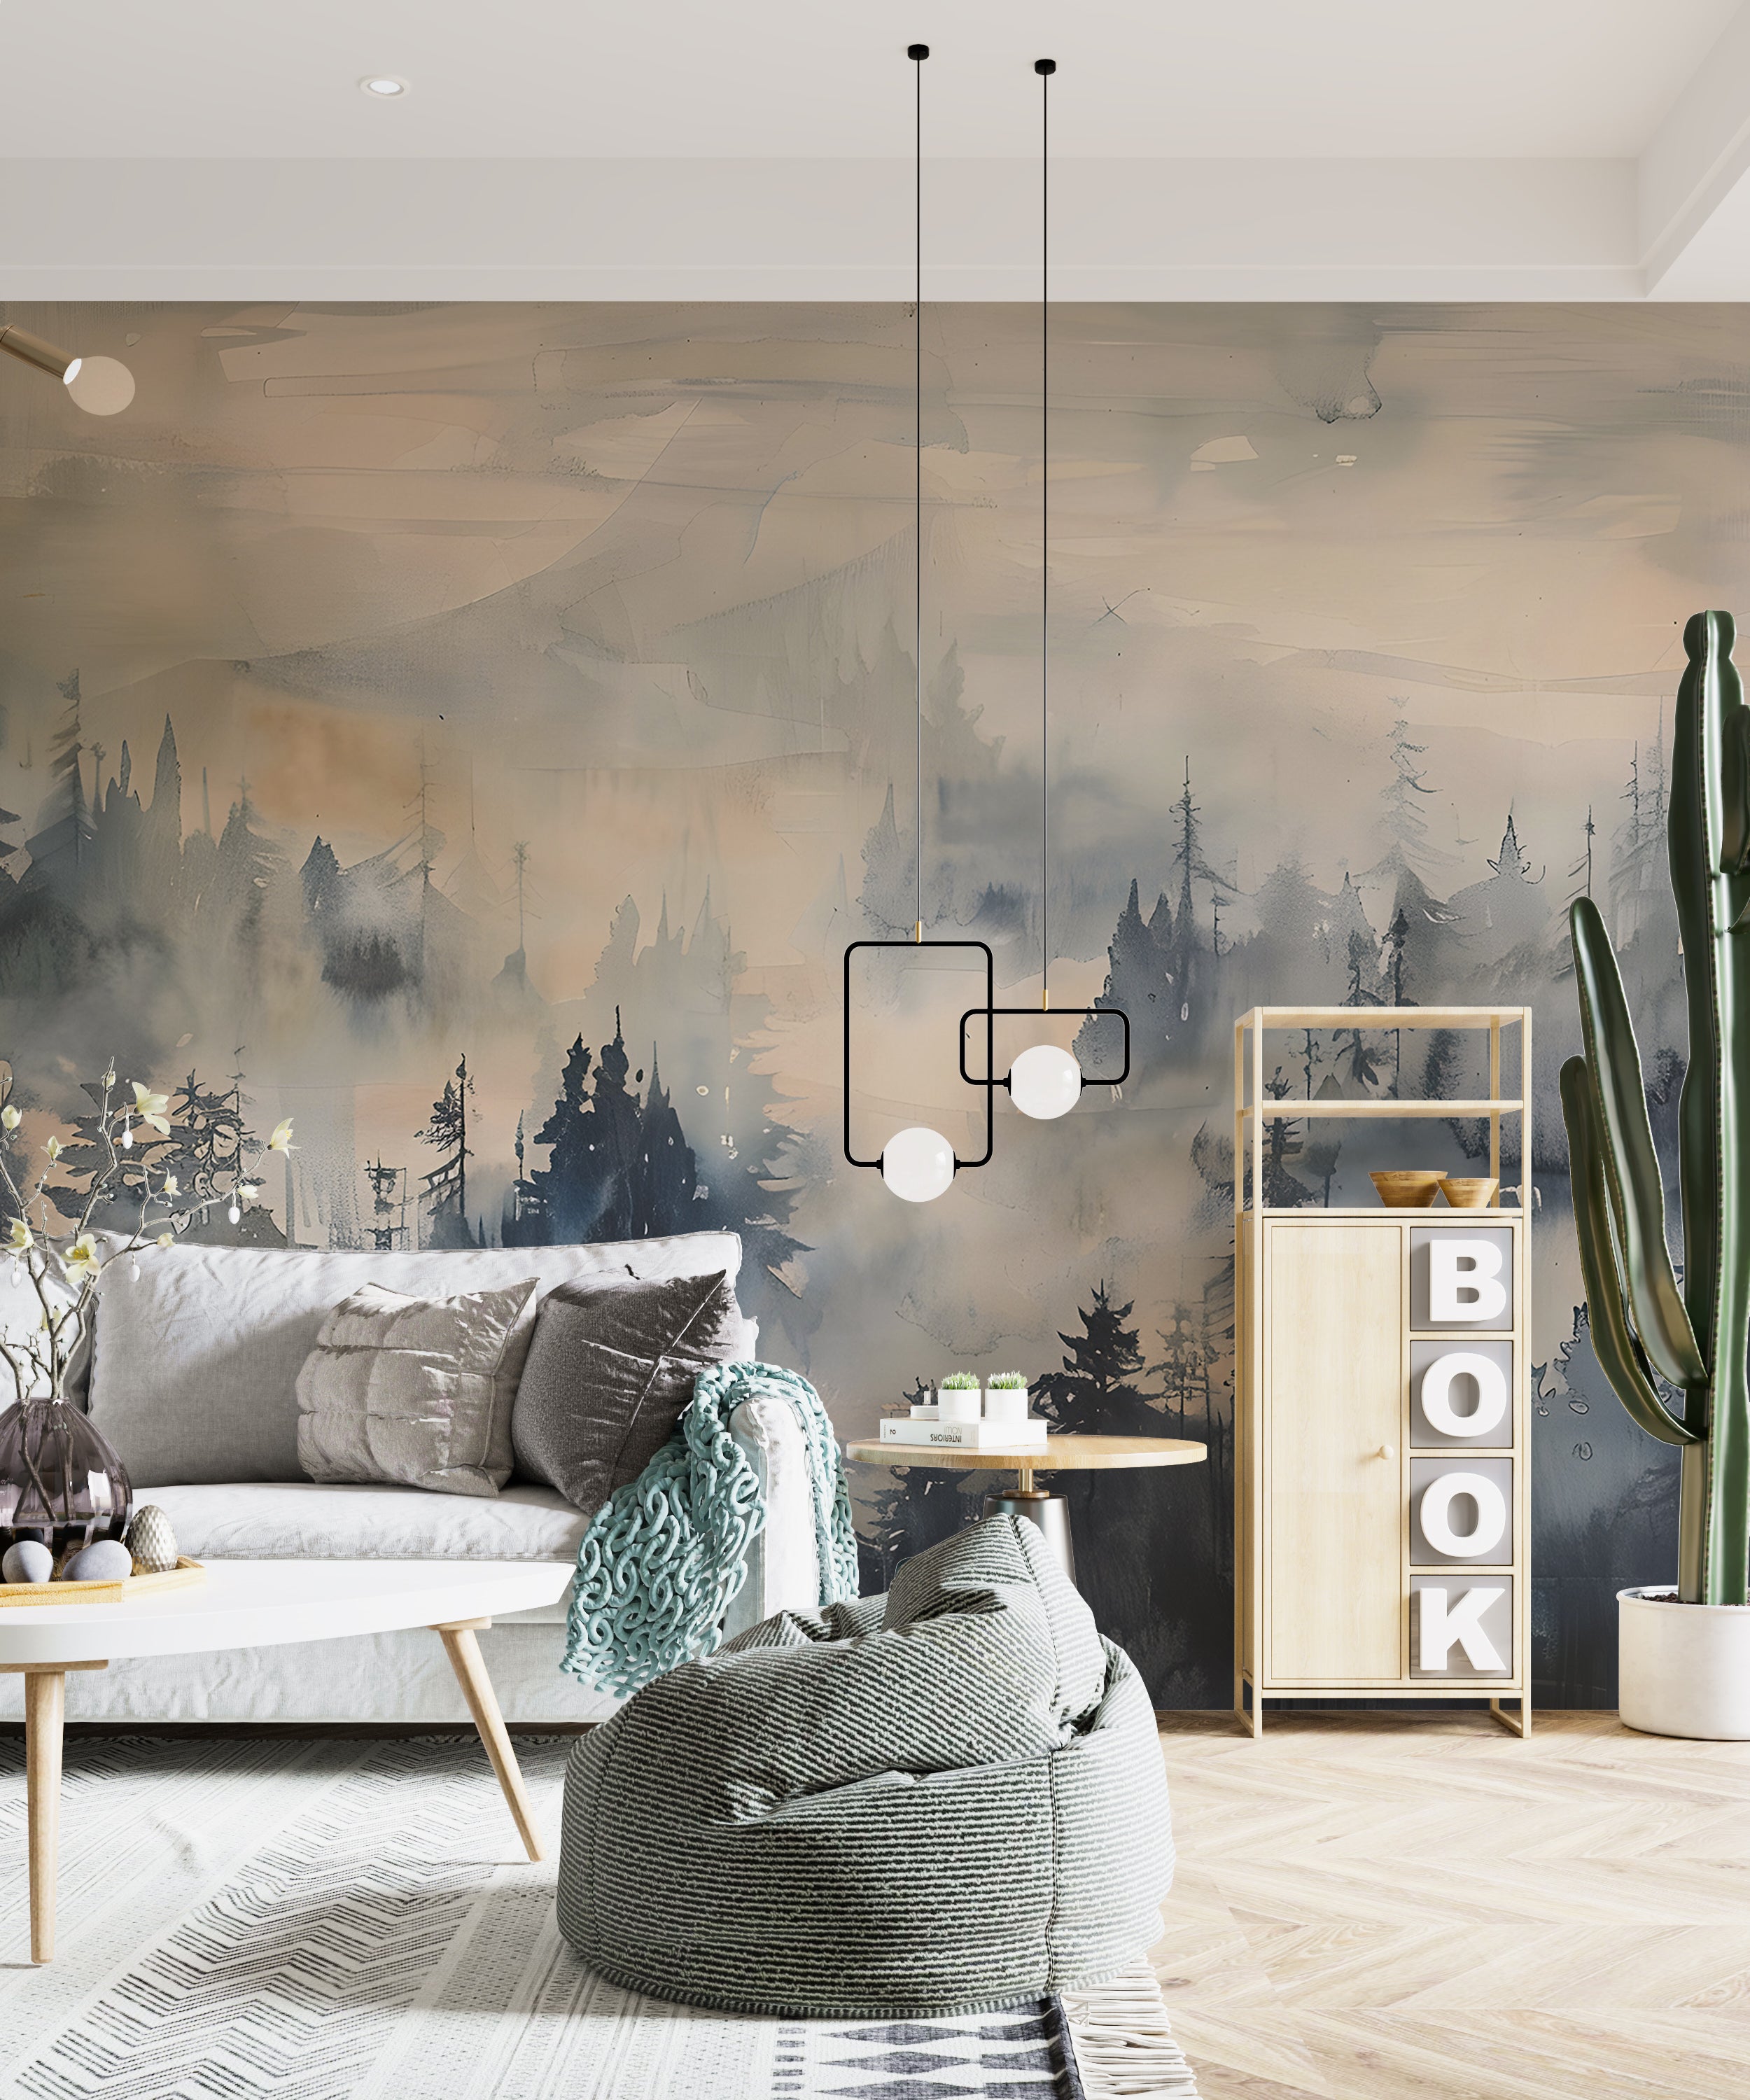 Misty Abstract Forest Wallpaper, Peel and Stick Foggy Forest Mural, Dark Watercolor Trees Decor, Removable Landscape Art